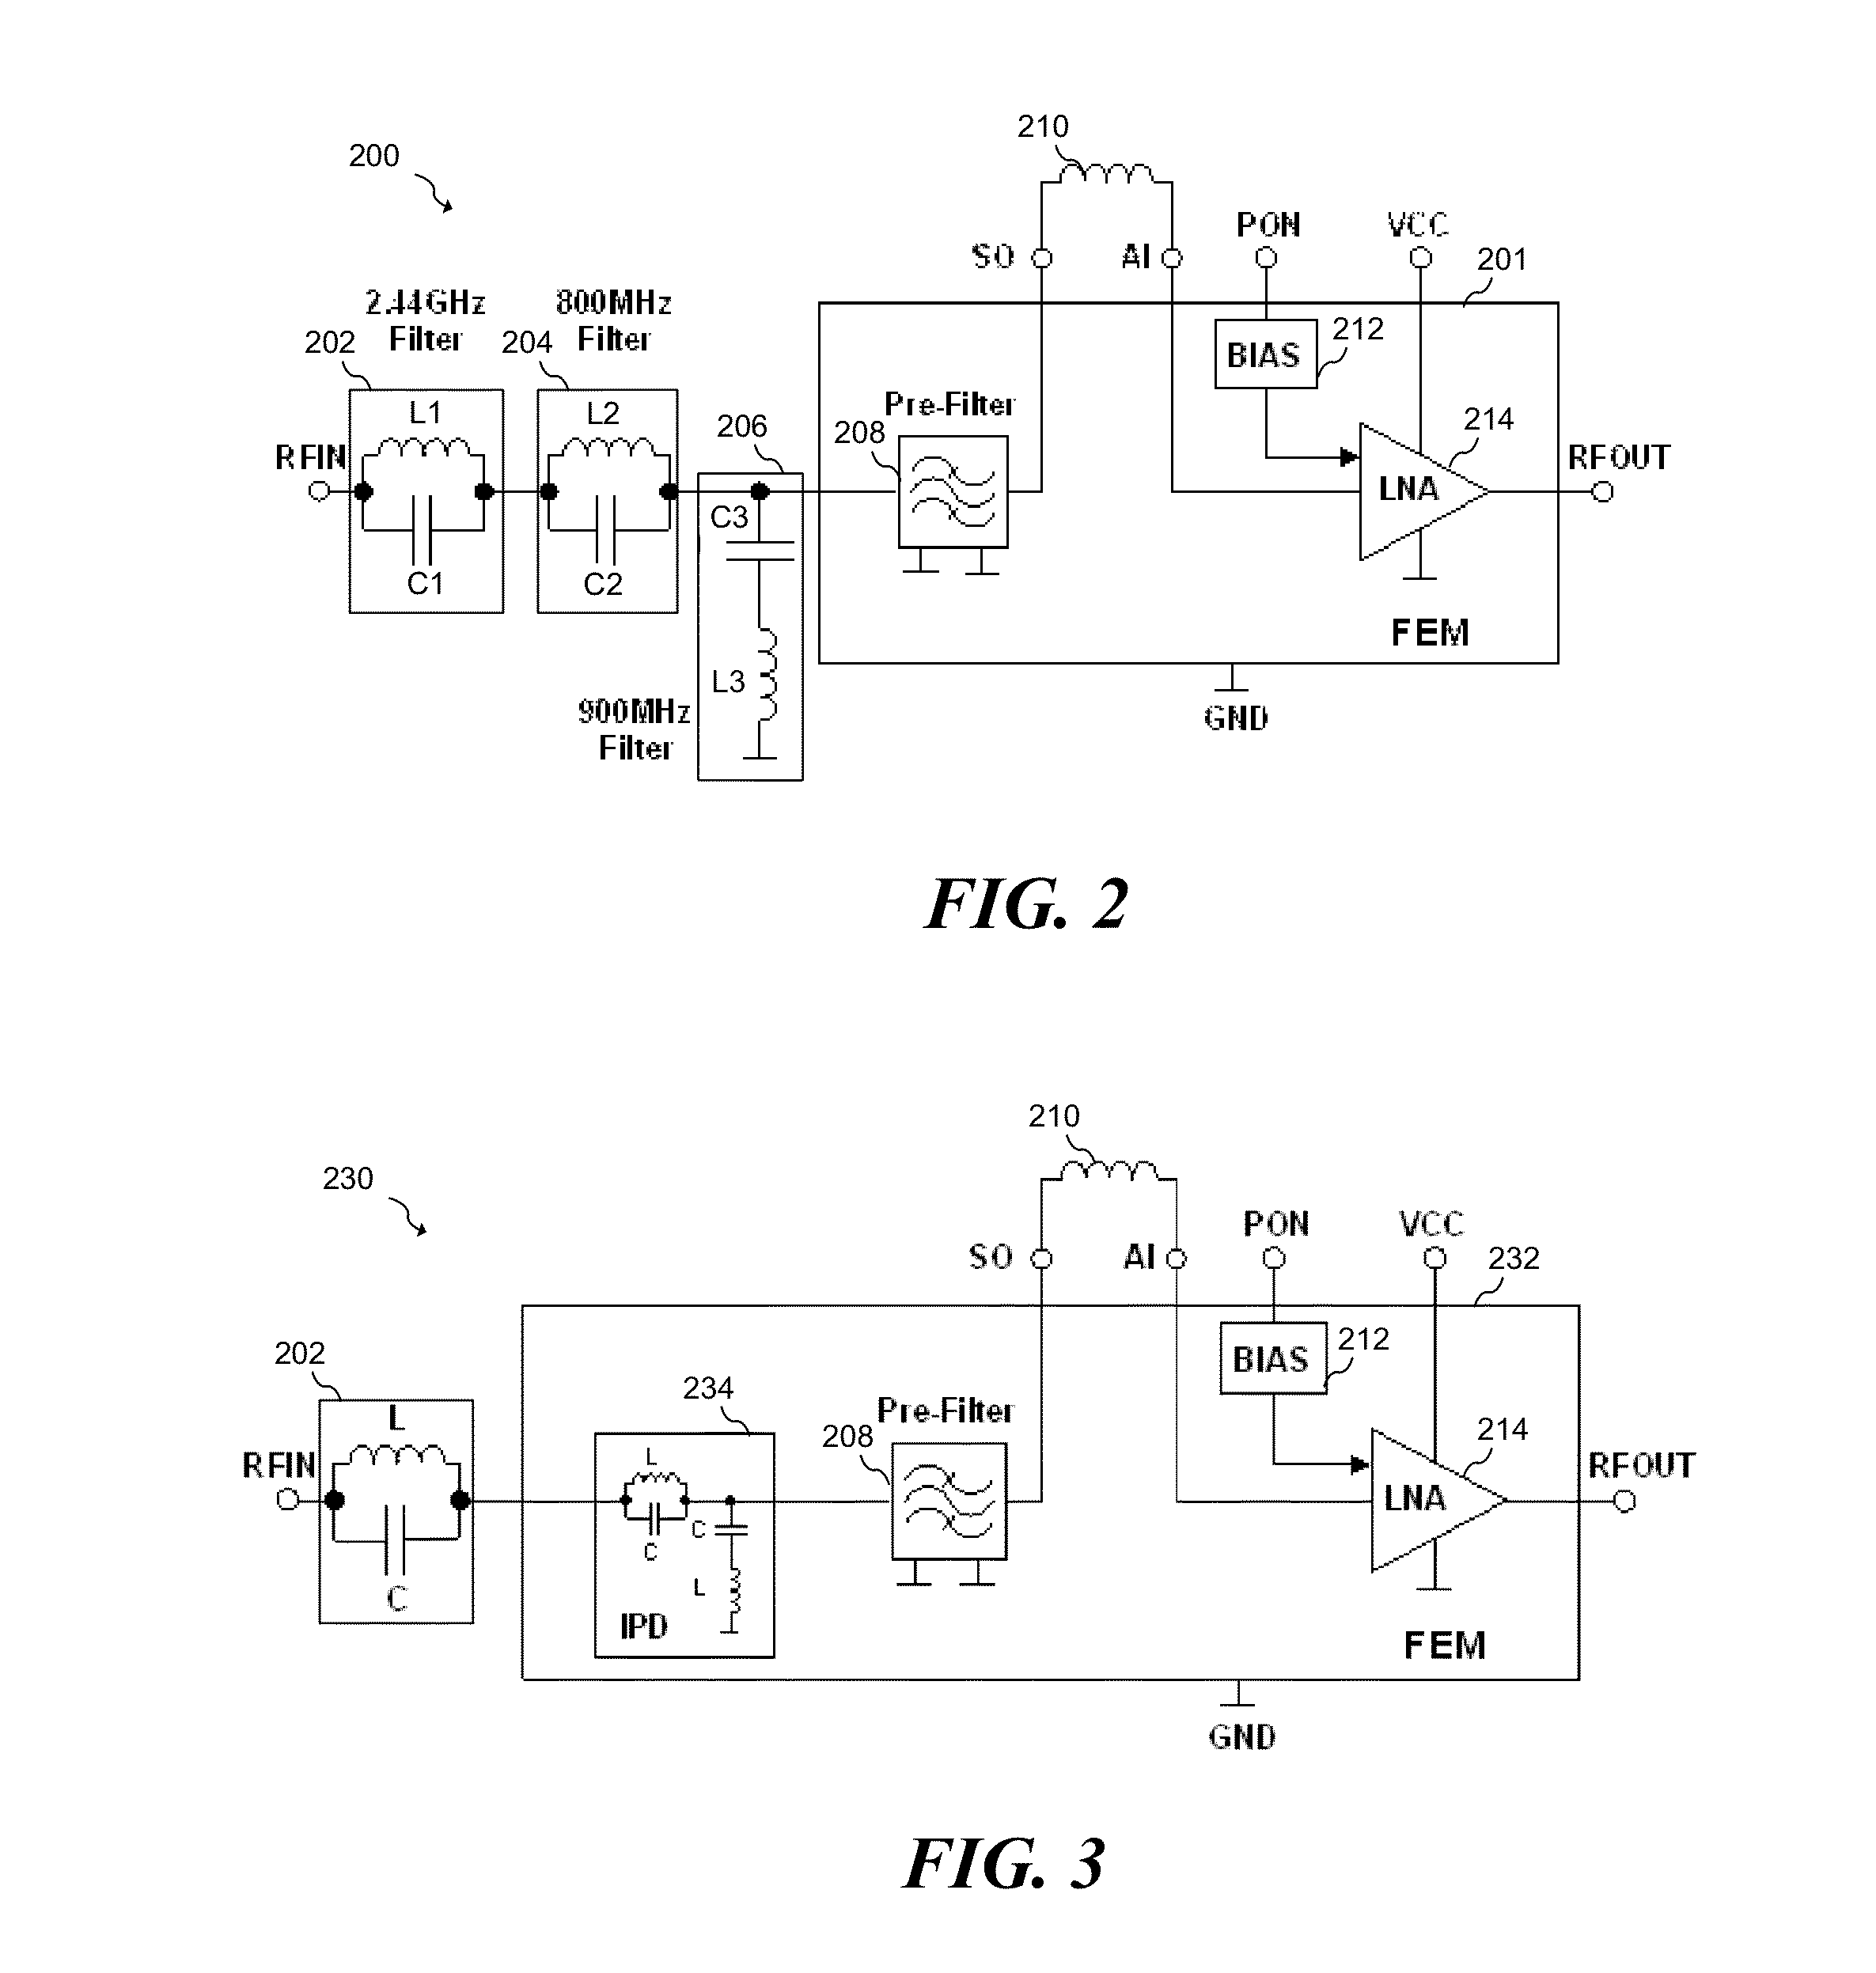 System and Method for an RF Receiver